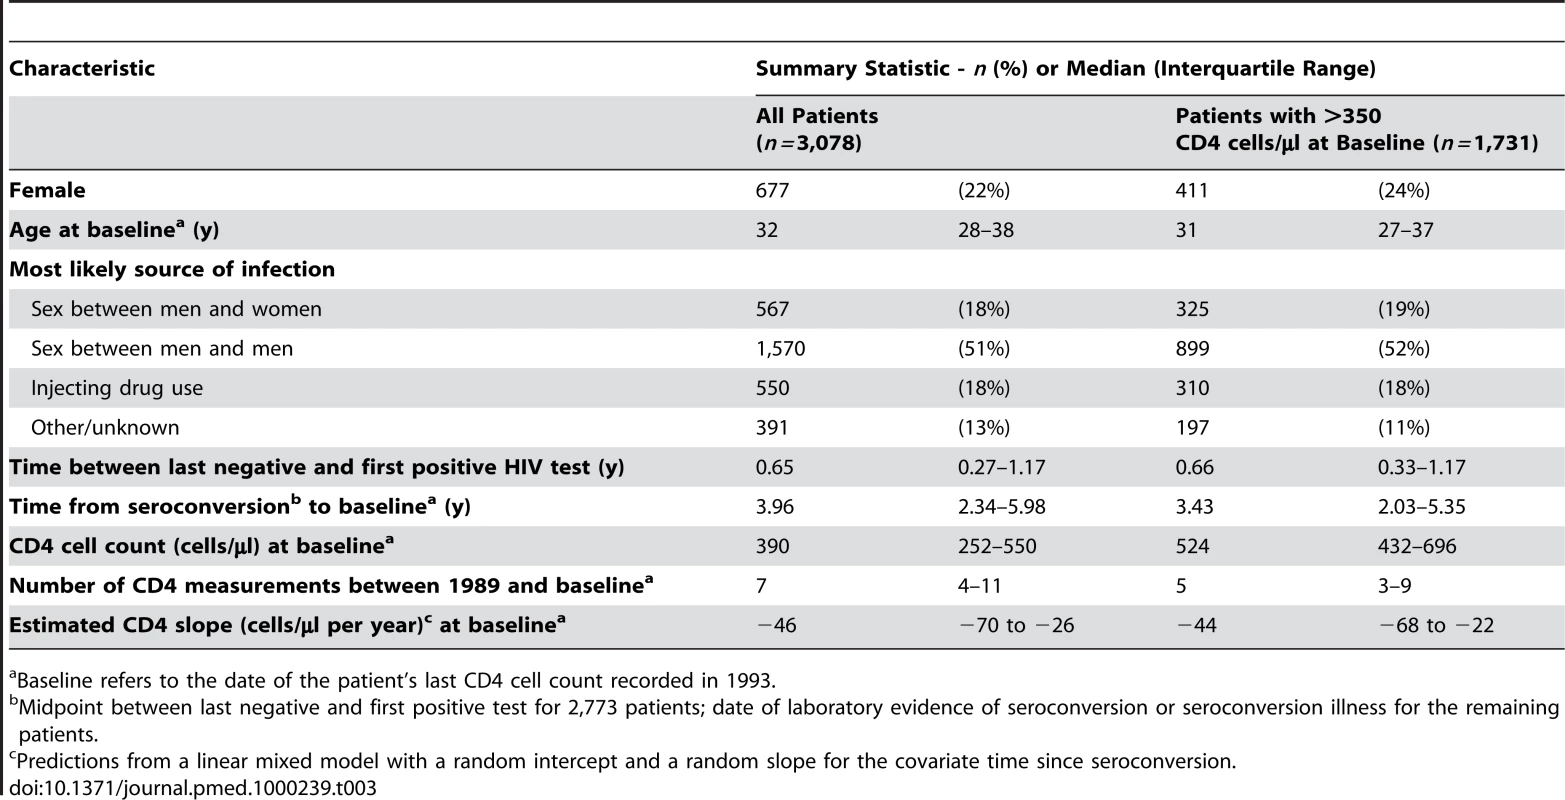 Characteristics of 3,078 AIDS-free patients from the CASCADE collaboration with a CD4 cell count in 1993 and at least one prior CD4 cell count.